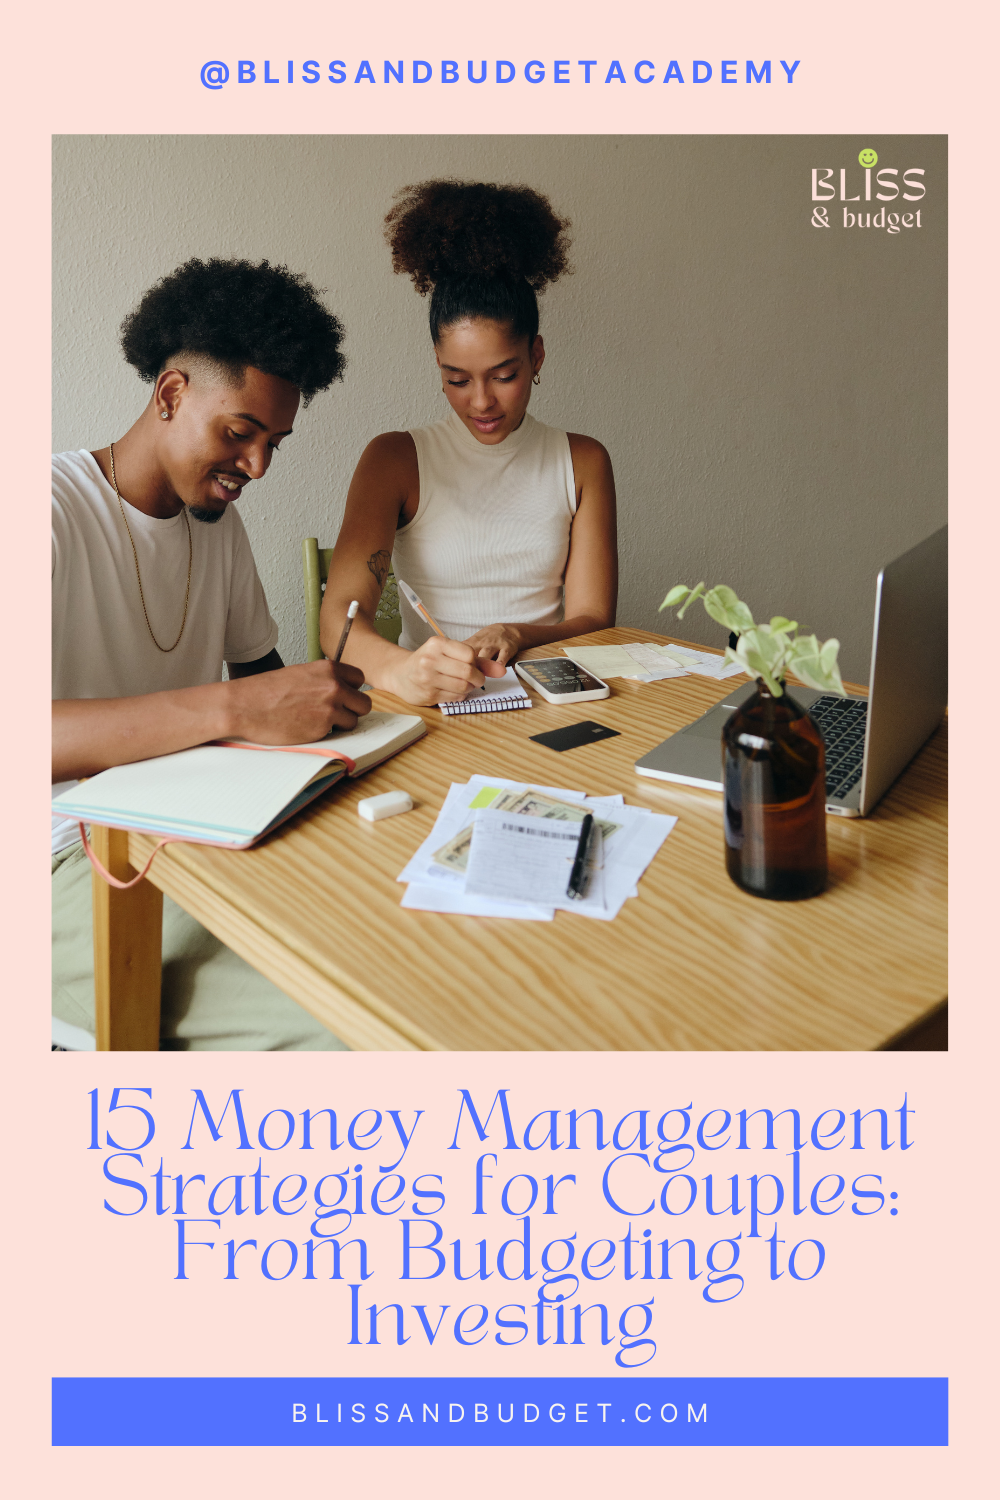 15 Money Management Strategies for Couples: From Budgeting to Investing